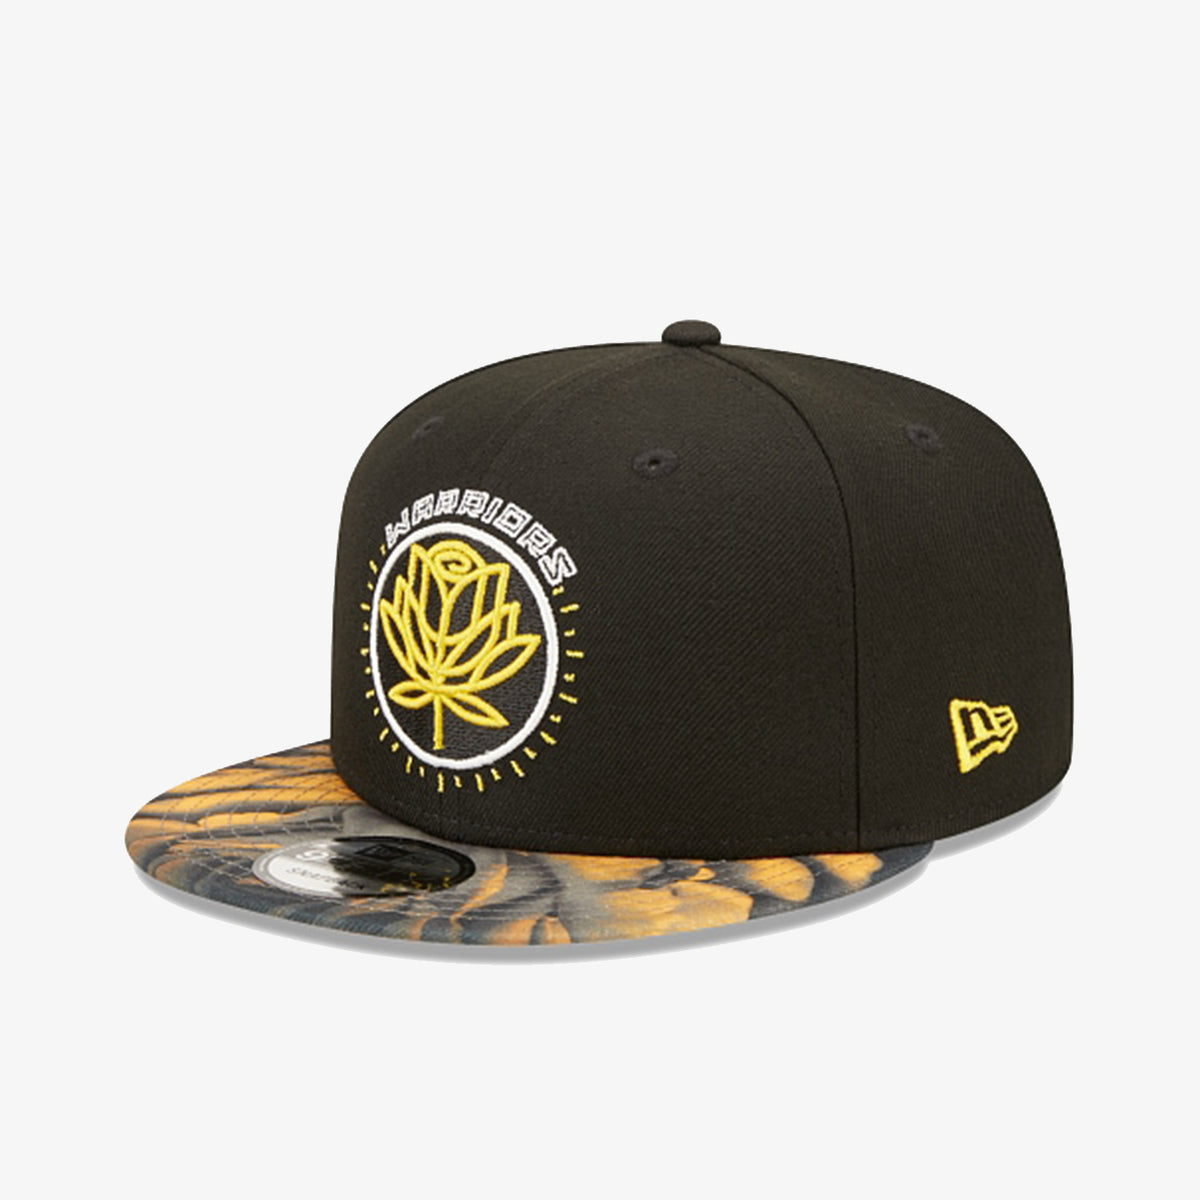 Golden State Warriors 9Fifty City Edition Snapback